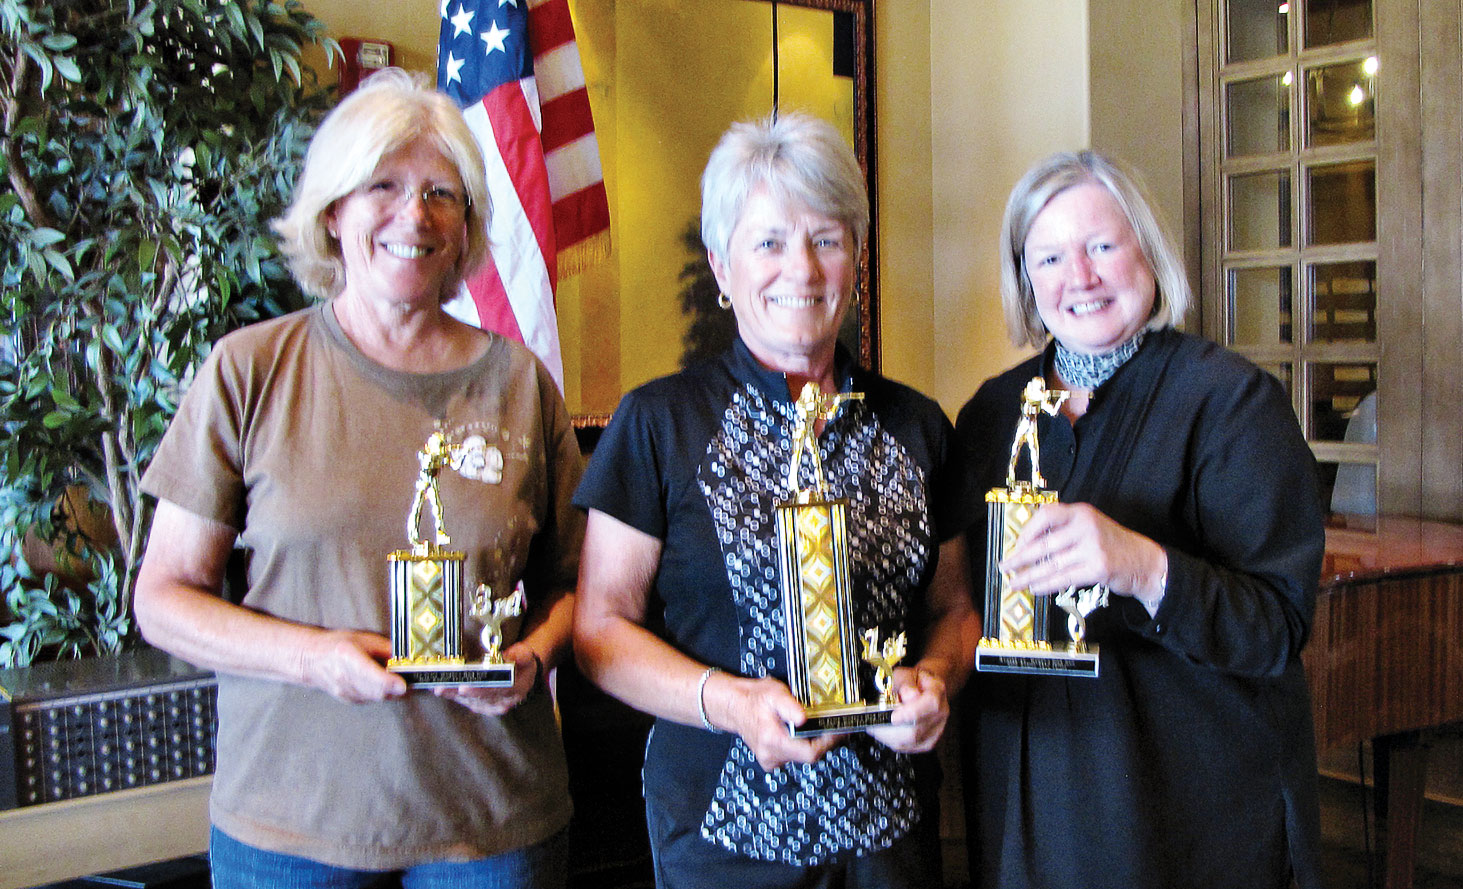 Top women shooters, left to right: Lori Klug, JoAnne Pollock and Susan Wilson